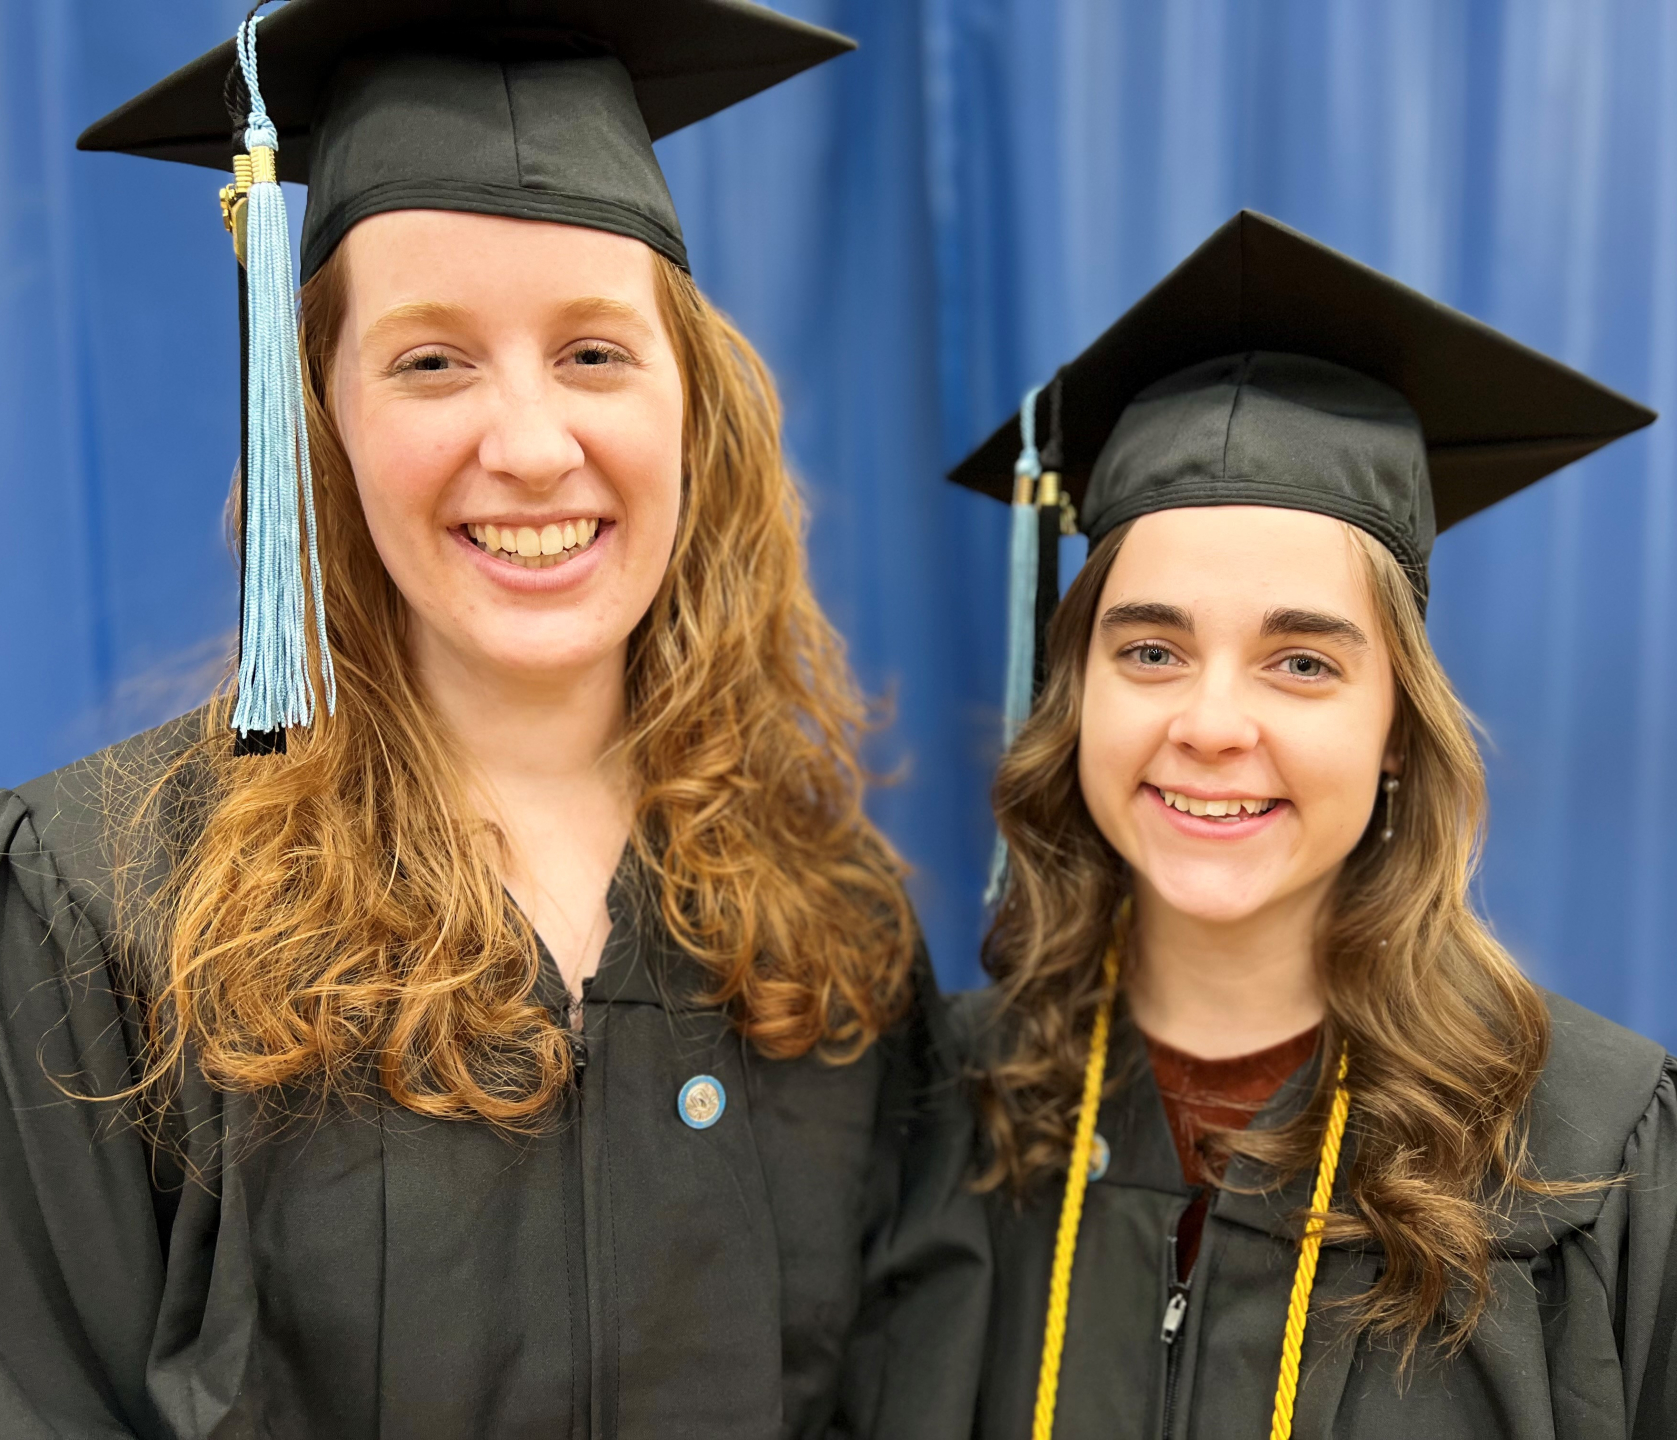 Heather (left) and Meghan (right) Puddington are sisters who completed their Nursing degrees in December.